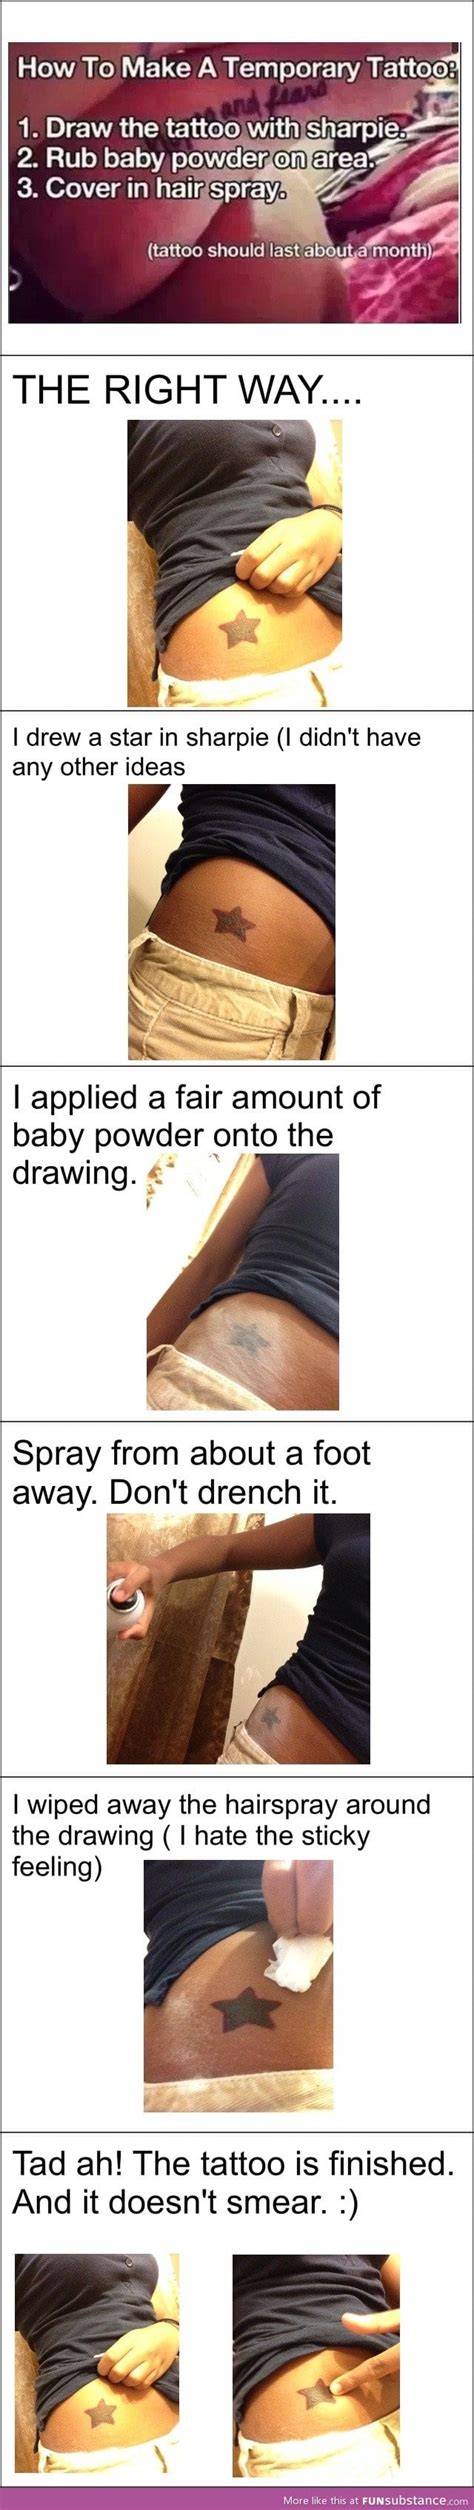 Set the tattoo with baby powder. Make a sharpie tattoo that lasts a month - FunSubstance